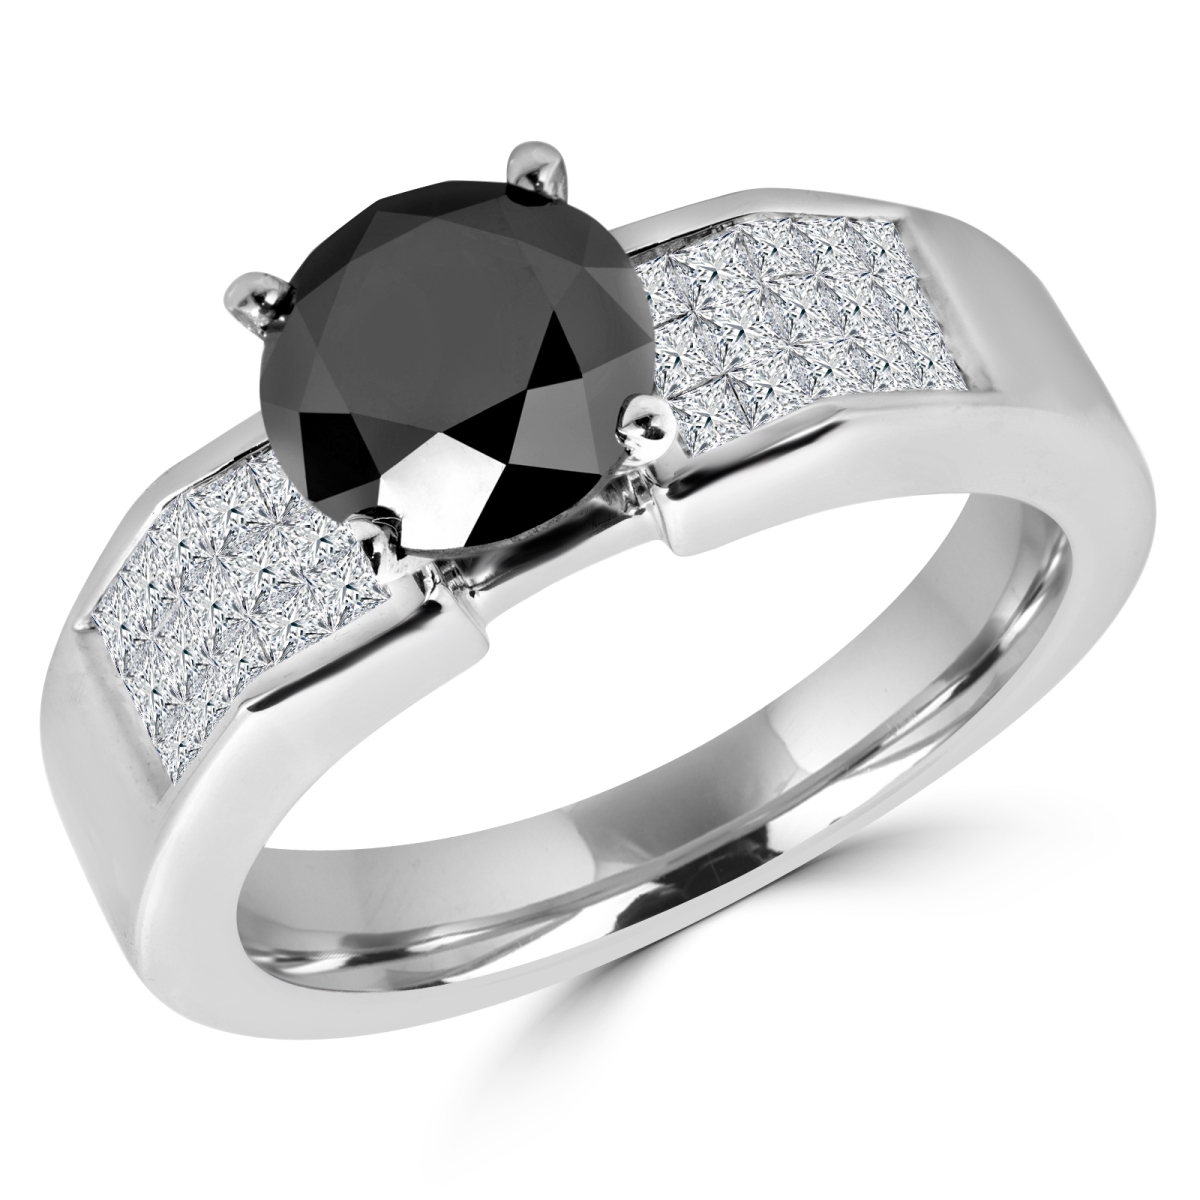 Picture of Majesty Diamonds MD180171-P 2.75 CTW Round Black Diamond Solitaire with Accents Engagement Ring in 14K White Gold